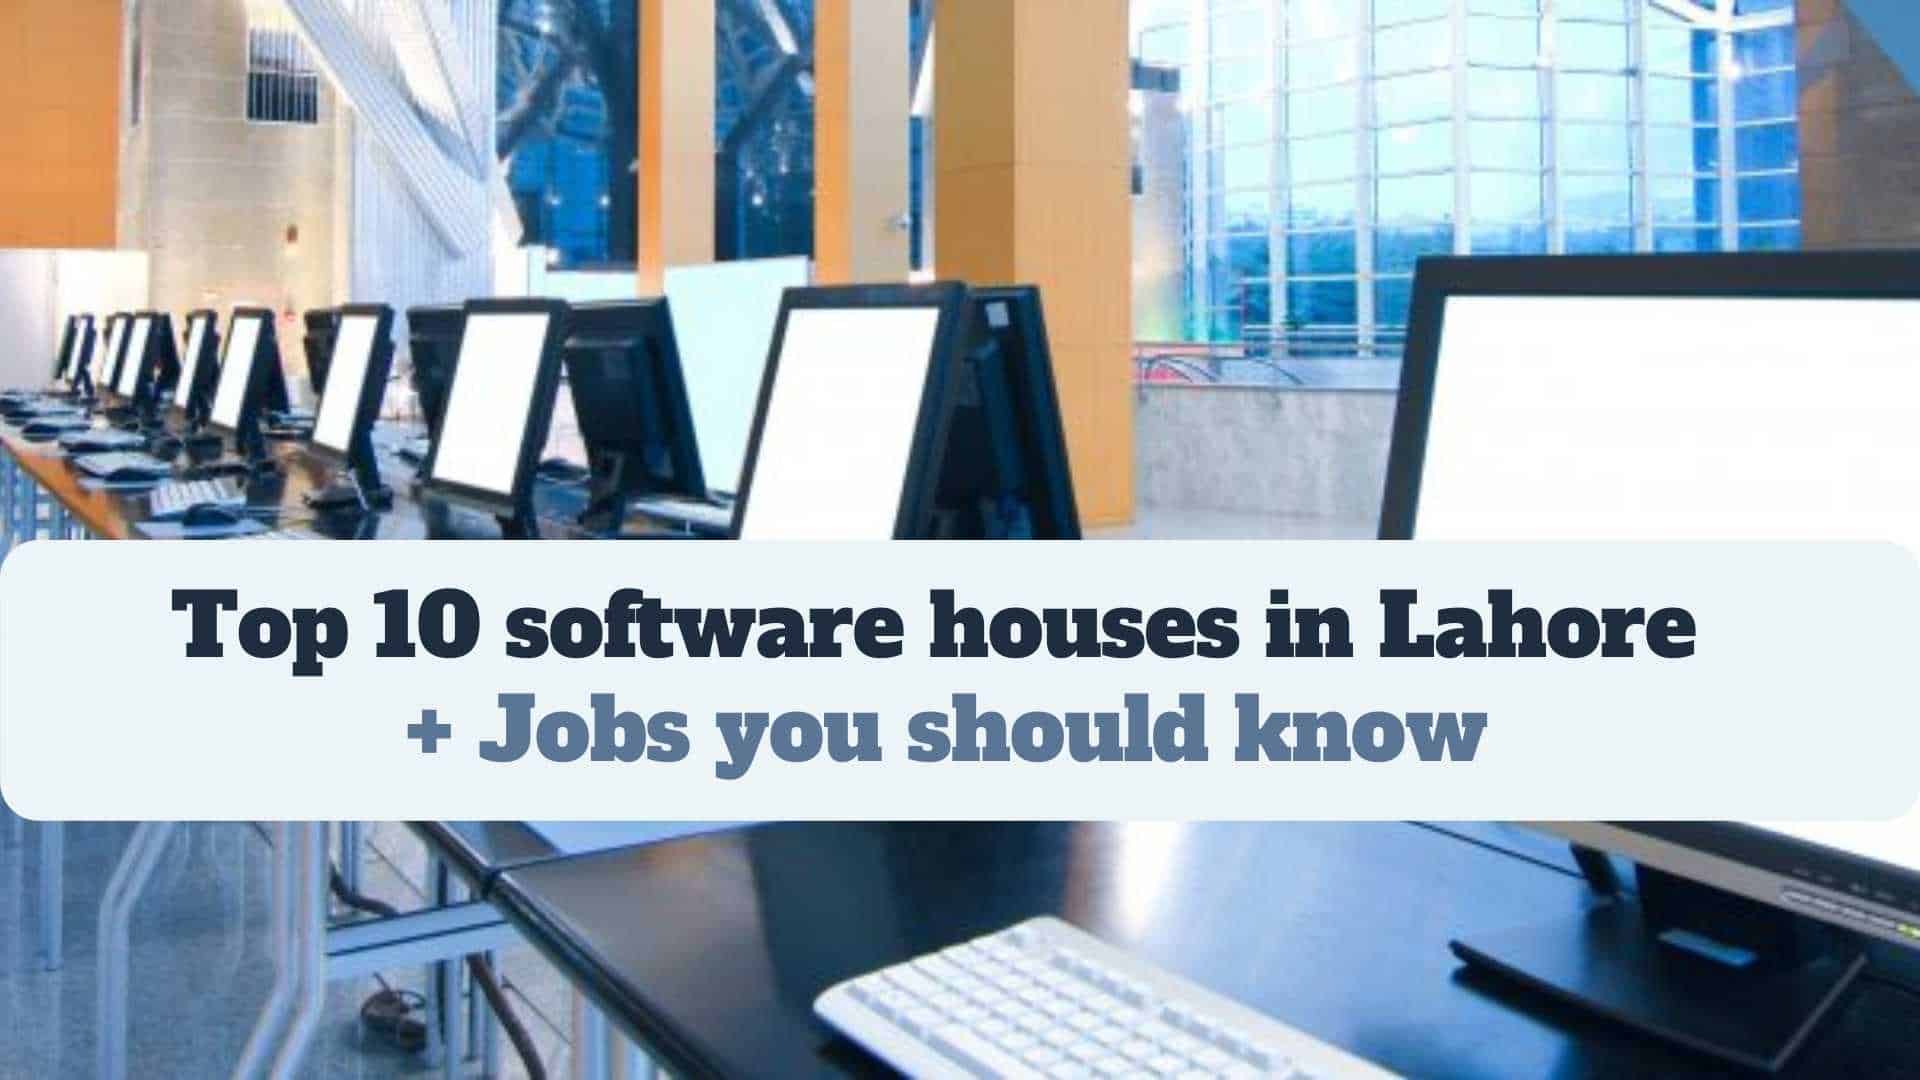 A Software House in Lahore, an SEO Agency in Pakistan